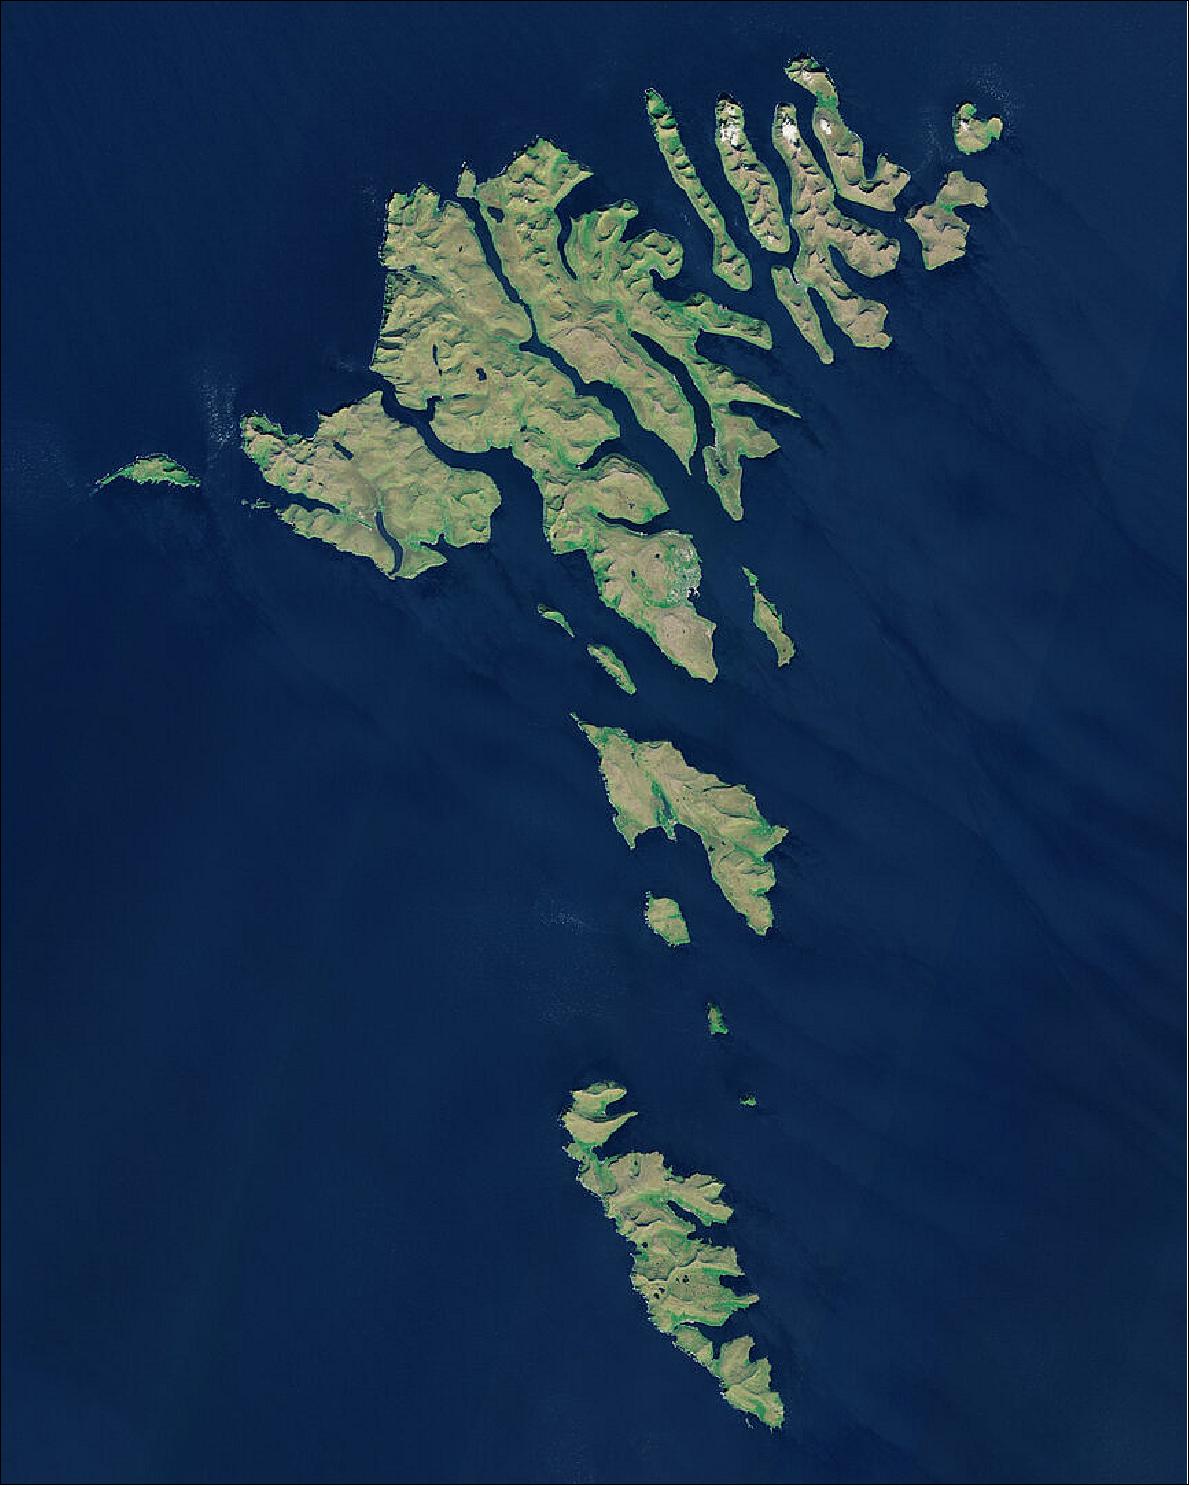 Figure 67: In this image of Sentinel-2, captured on 21 June 2018, several clouds can be seen over the Northern Isles, top right of the image. Low vegetation is visible in bright green. The unique landscape of the Faroe Islands was shaped by volcanic activity approximately 50 to 60 million years ago. The original plateau was later restructured by the glaciers of the ice age and the landscape eroded into an archipelago characterized by steep cliffs, deep valleys and narrow fjords. This image is also featured on the Earth from Space video program (image credit: ESA, the image contains modified Copernicus Sentinel data (2018), processed by ESA, CC BY-SA 3.0 IGO)